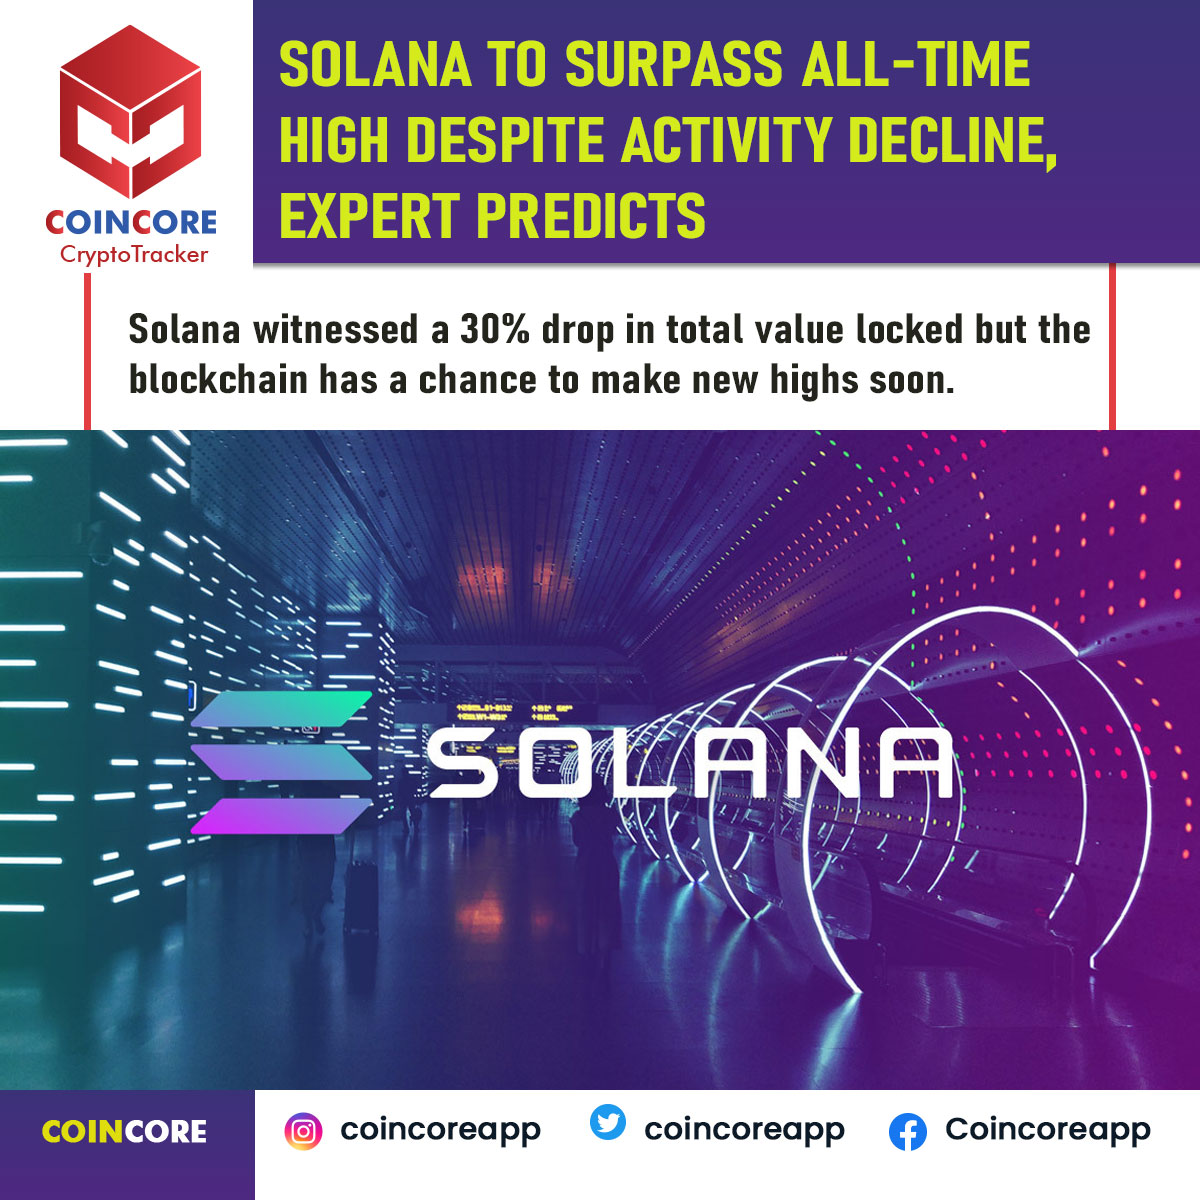 According to DefiLlama, the value of decentralized applications fell by $10 billion in April. In addition, the total value locked (TVL) of the Solana blockchain has fallen from  March peak of $4.64 billion to $3.8 billion at the time of writing. 

#coincore #solana #defi #crypto